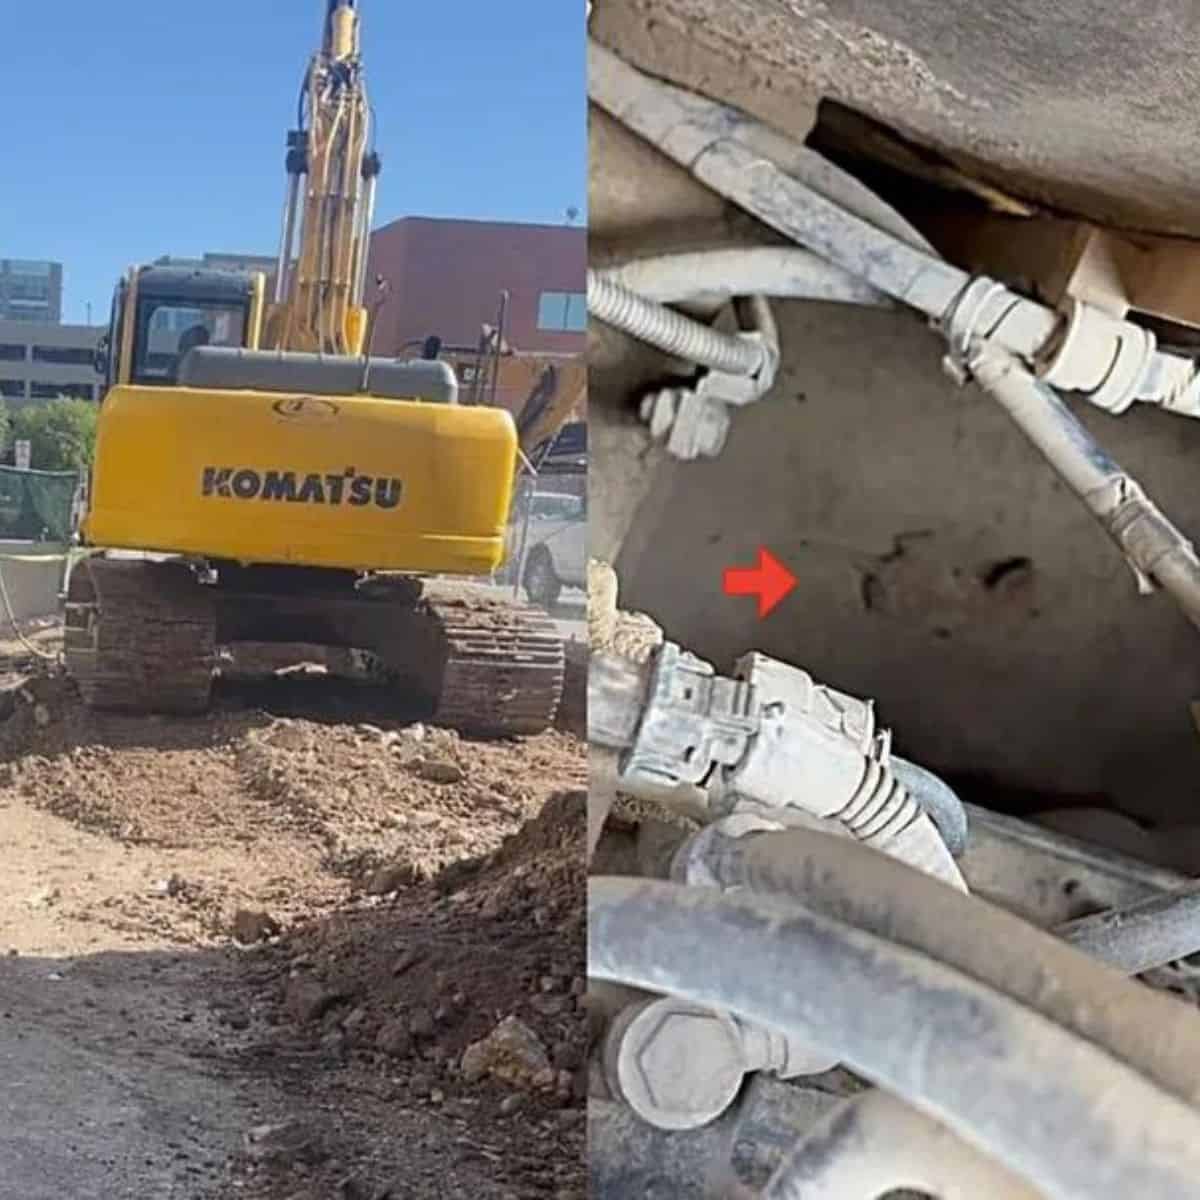 photo of an excavator where the kitten was found